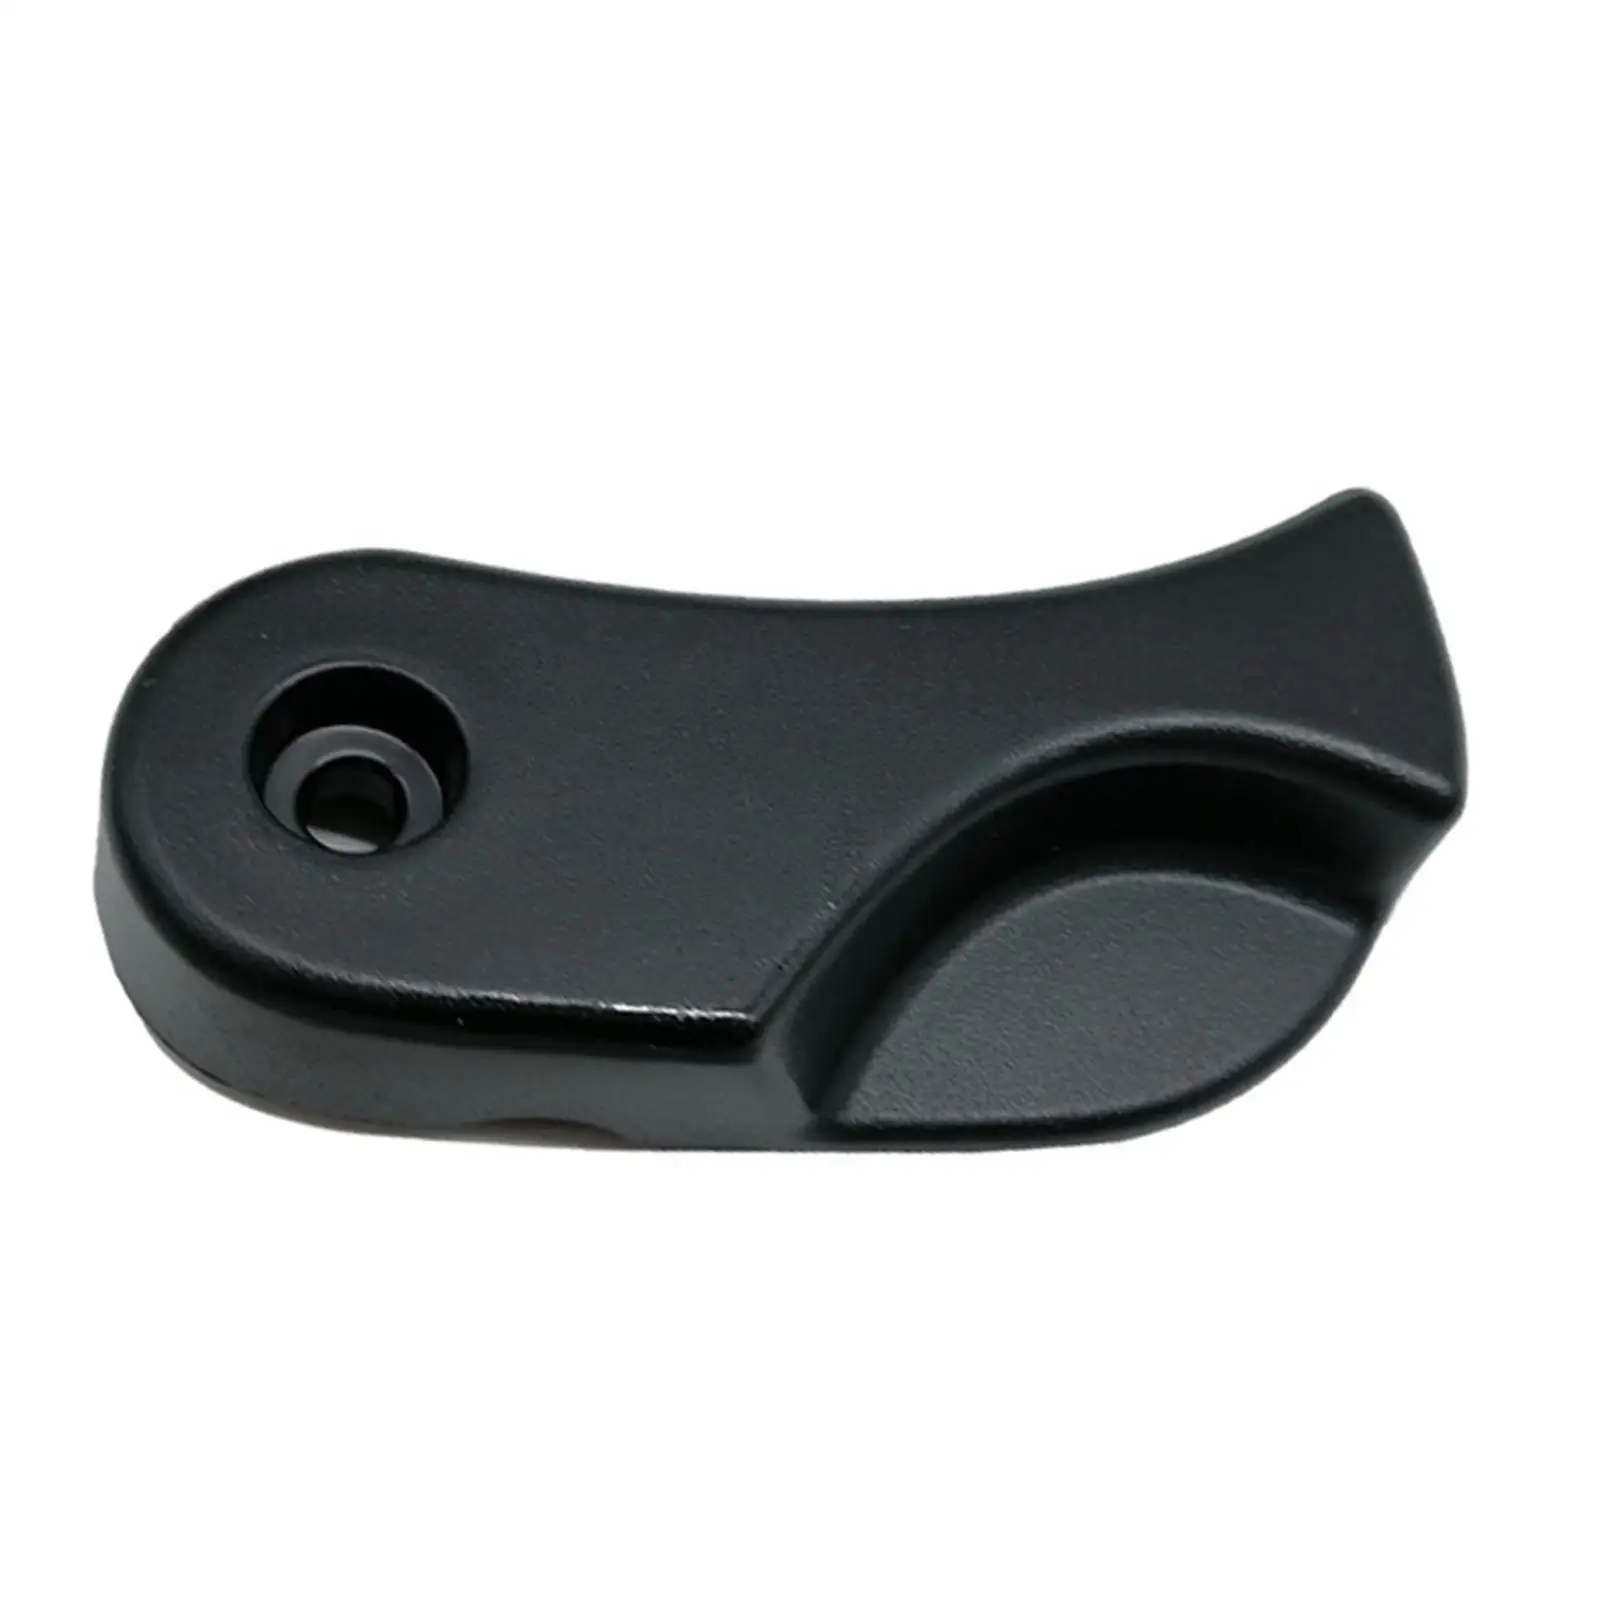 Hood Release Handle Engine Cover Hood Release Holder Handle for BMW 3 Series 4 Series Convenient Installation Replaces